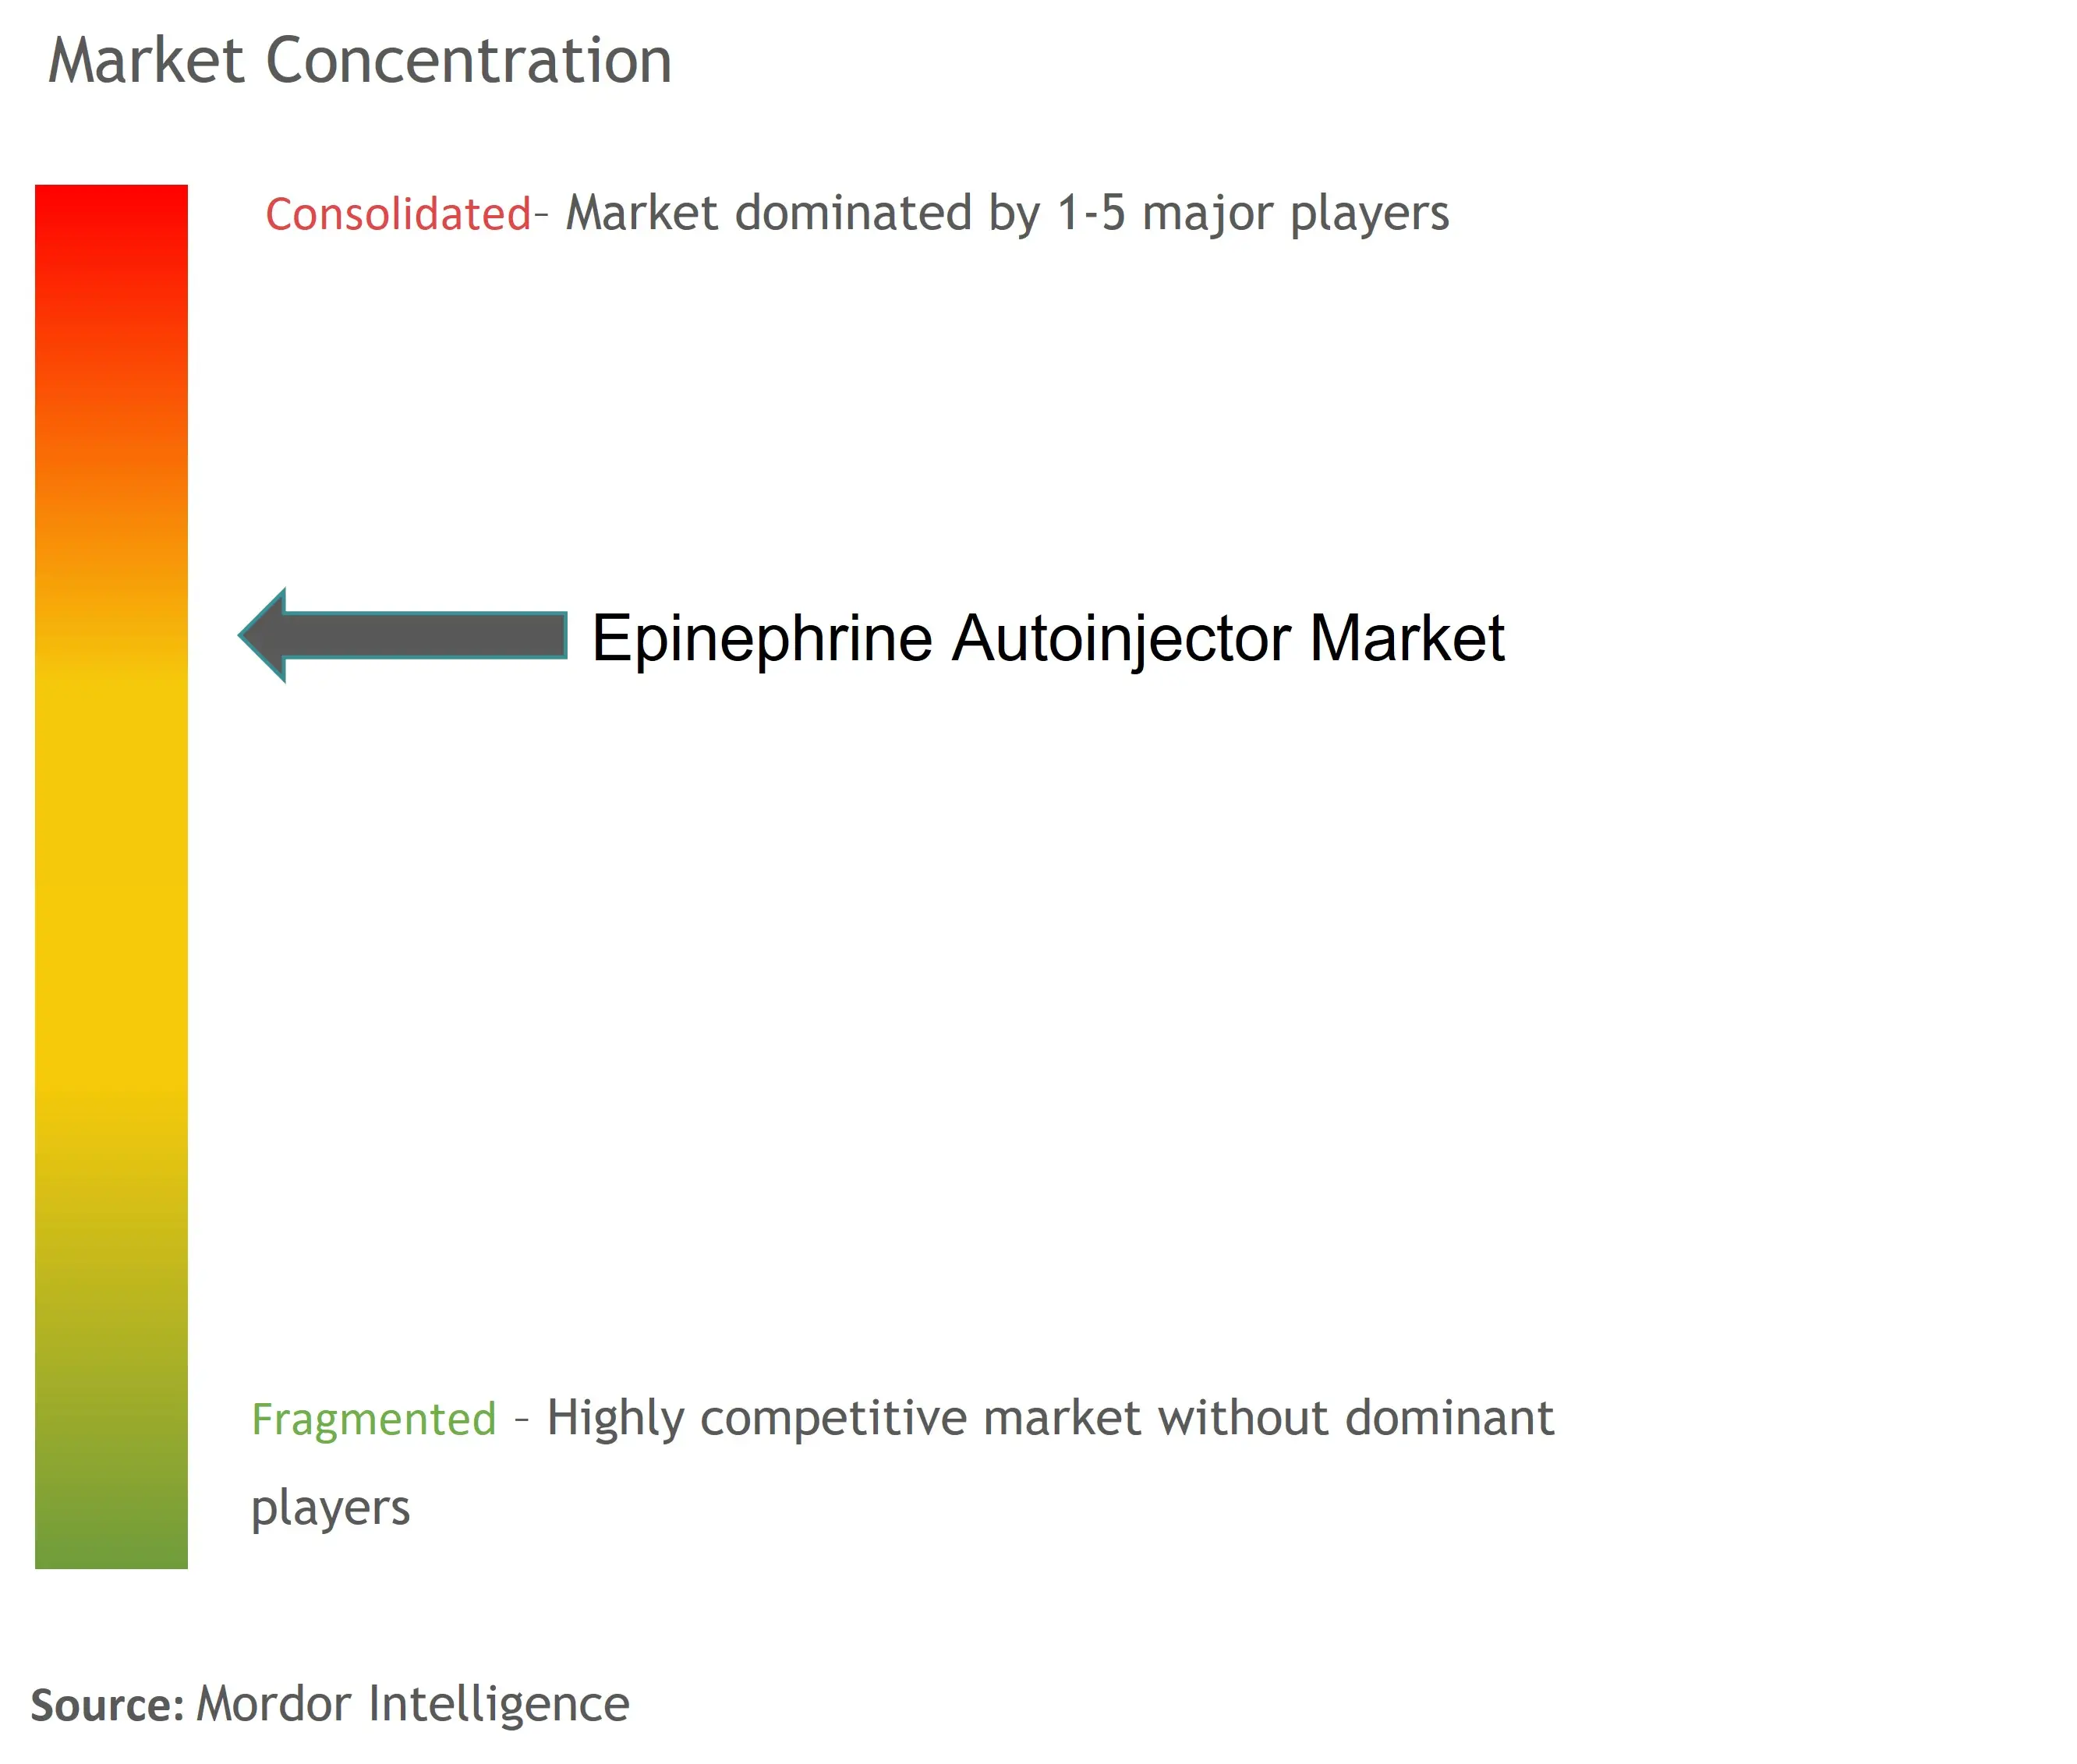 Epinephrine Autoinjector Market Concentration